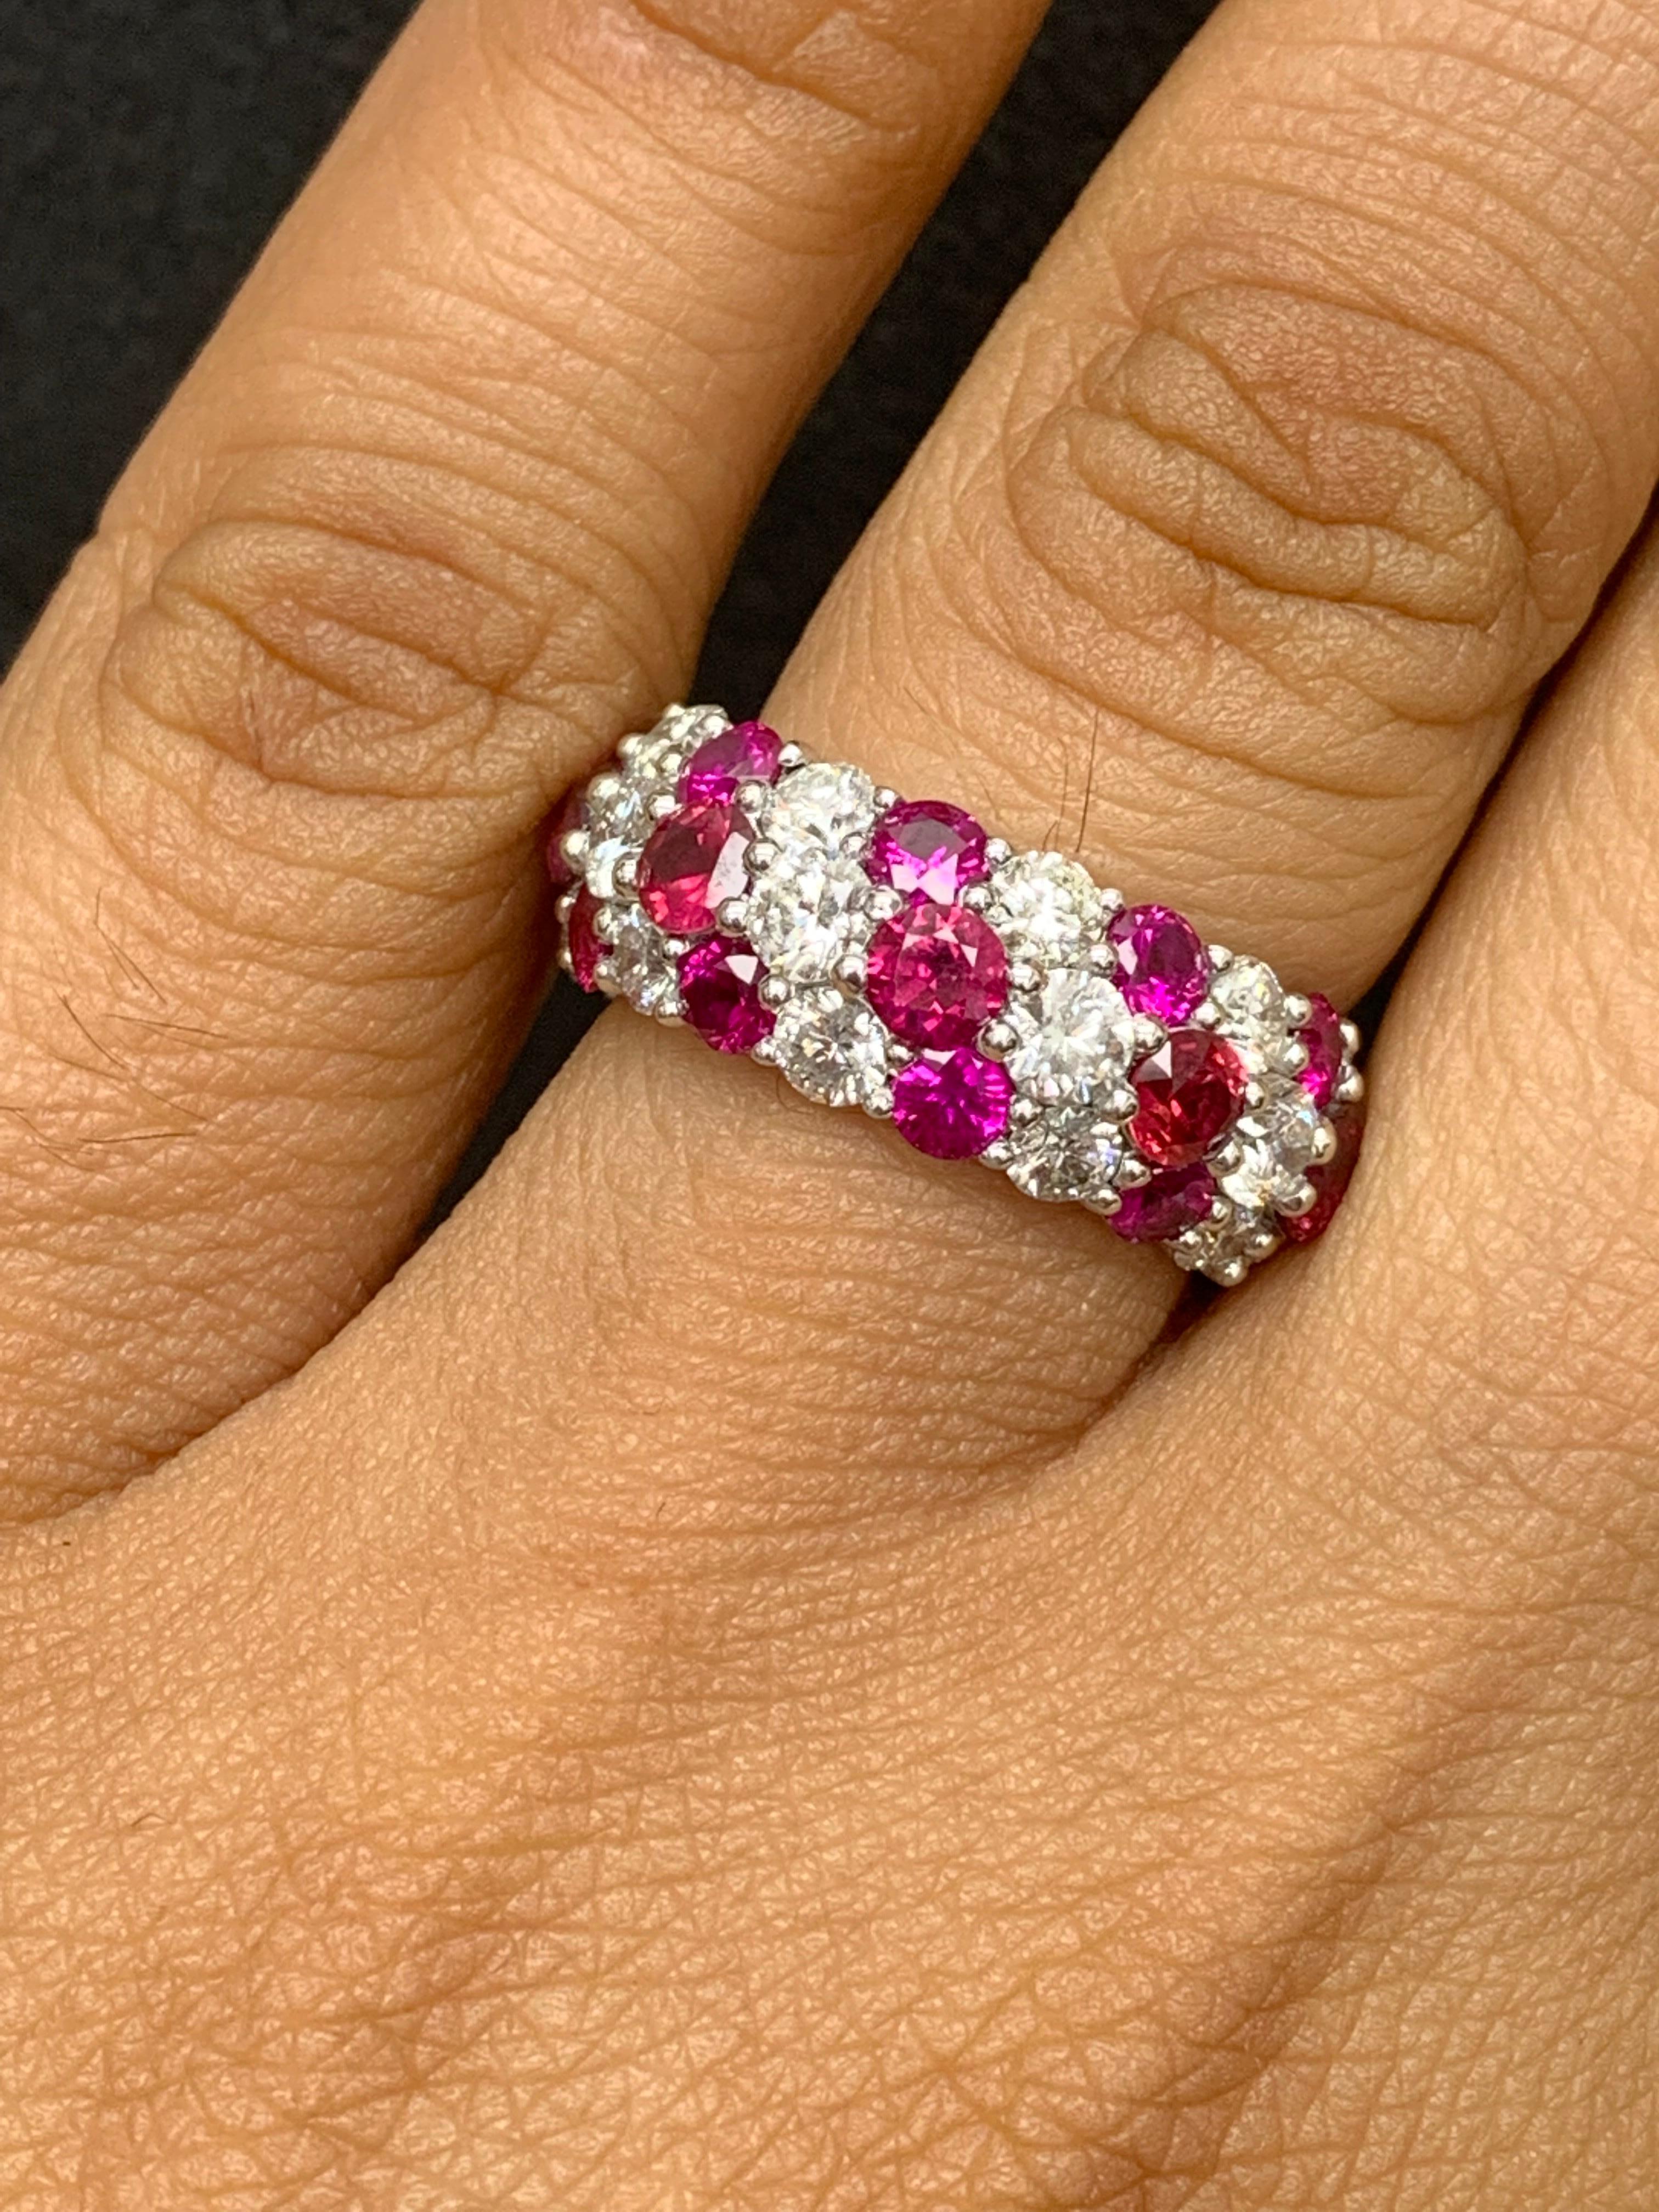 A unique and fashionable ZicZac ring showcasing three rows of round-shape 18 rubies and 15 diamonds, set in a band design. Rubies weigh 2.80 carats and Diamonds weigh 1.75 carats in total. A brilliant and masterfully-made piece.

Style is available